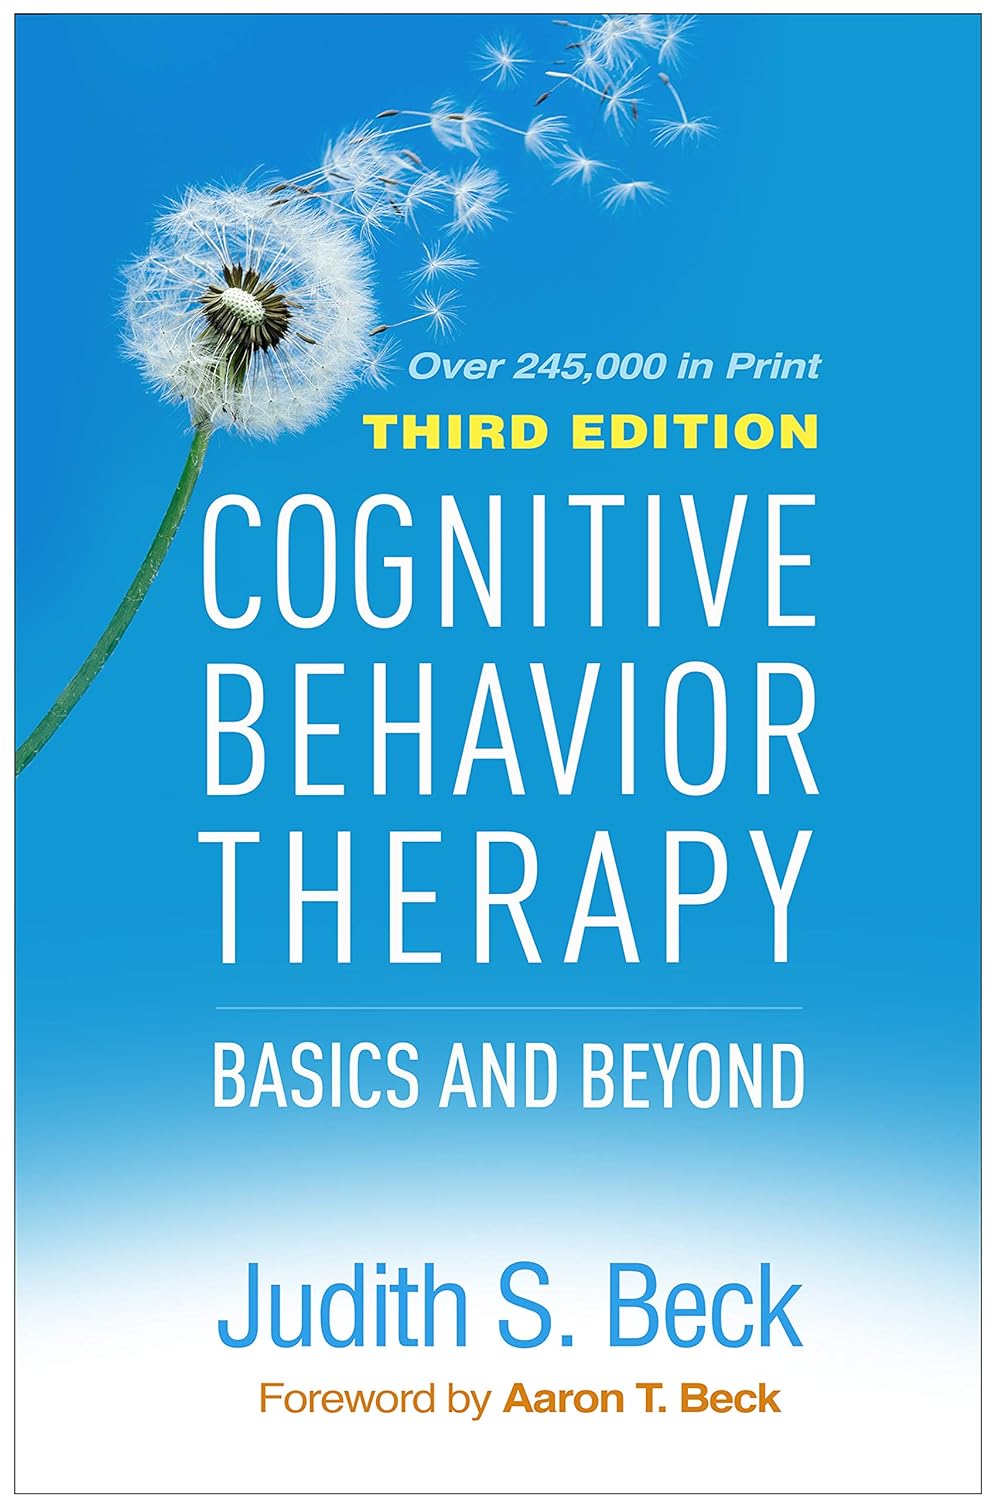 the cover image of the test downloadable test bank accompanying Cognitive Behavior Therapy by Judith Beck